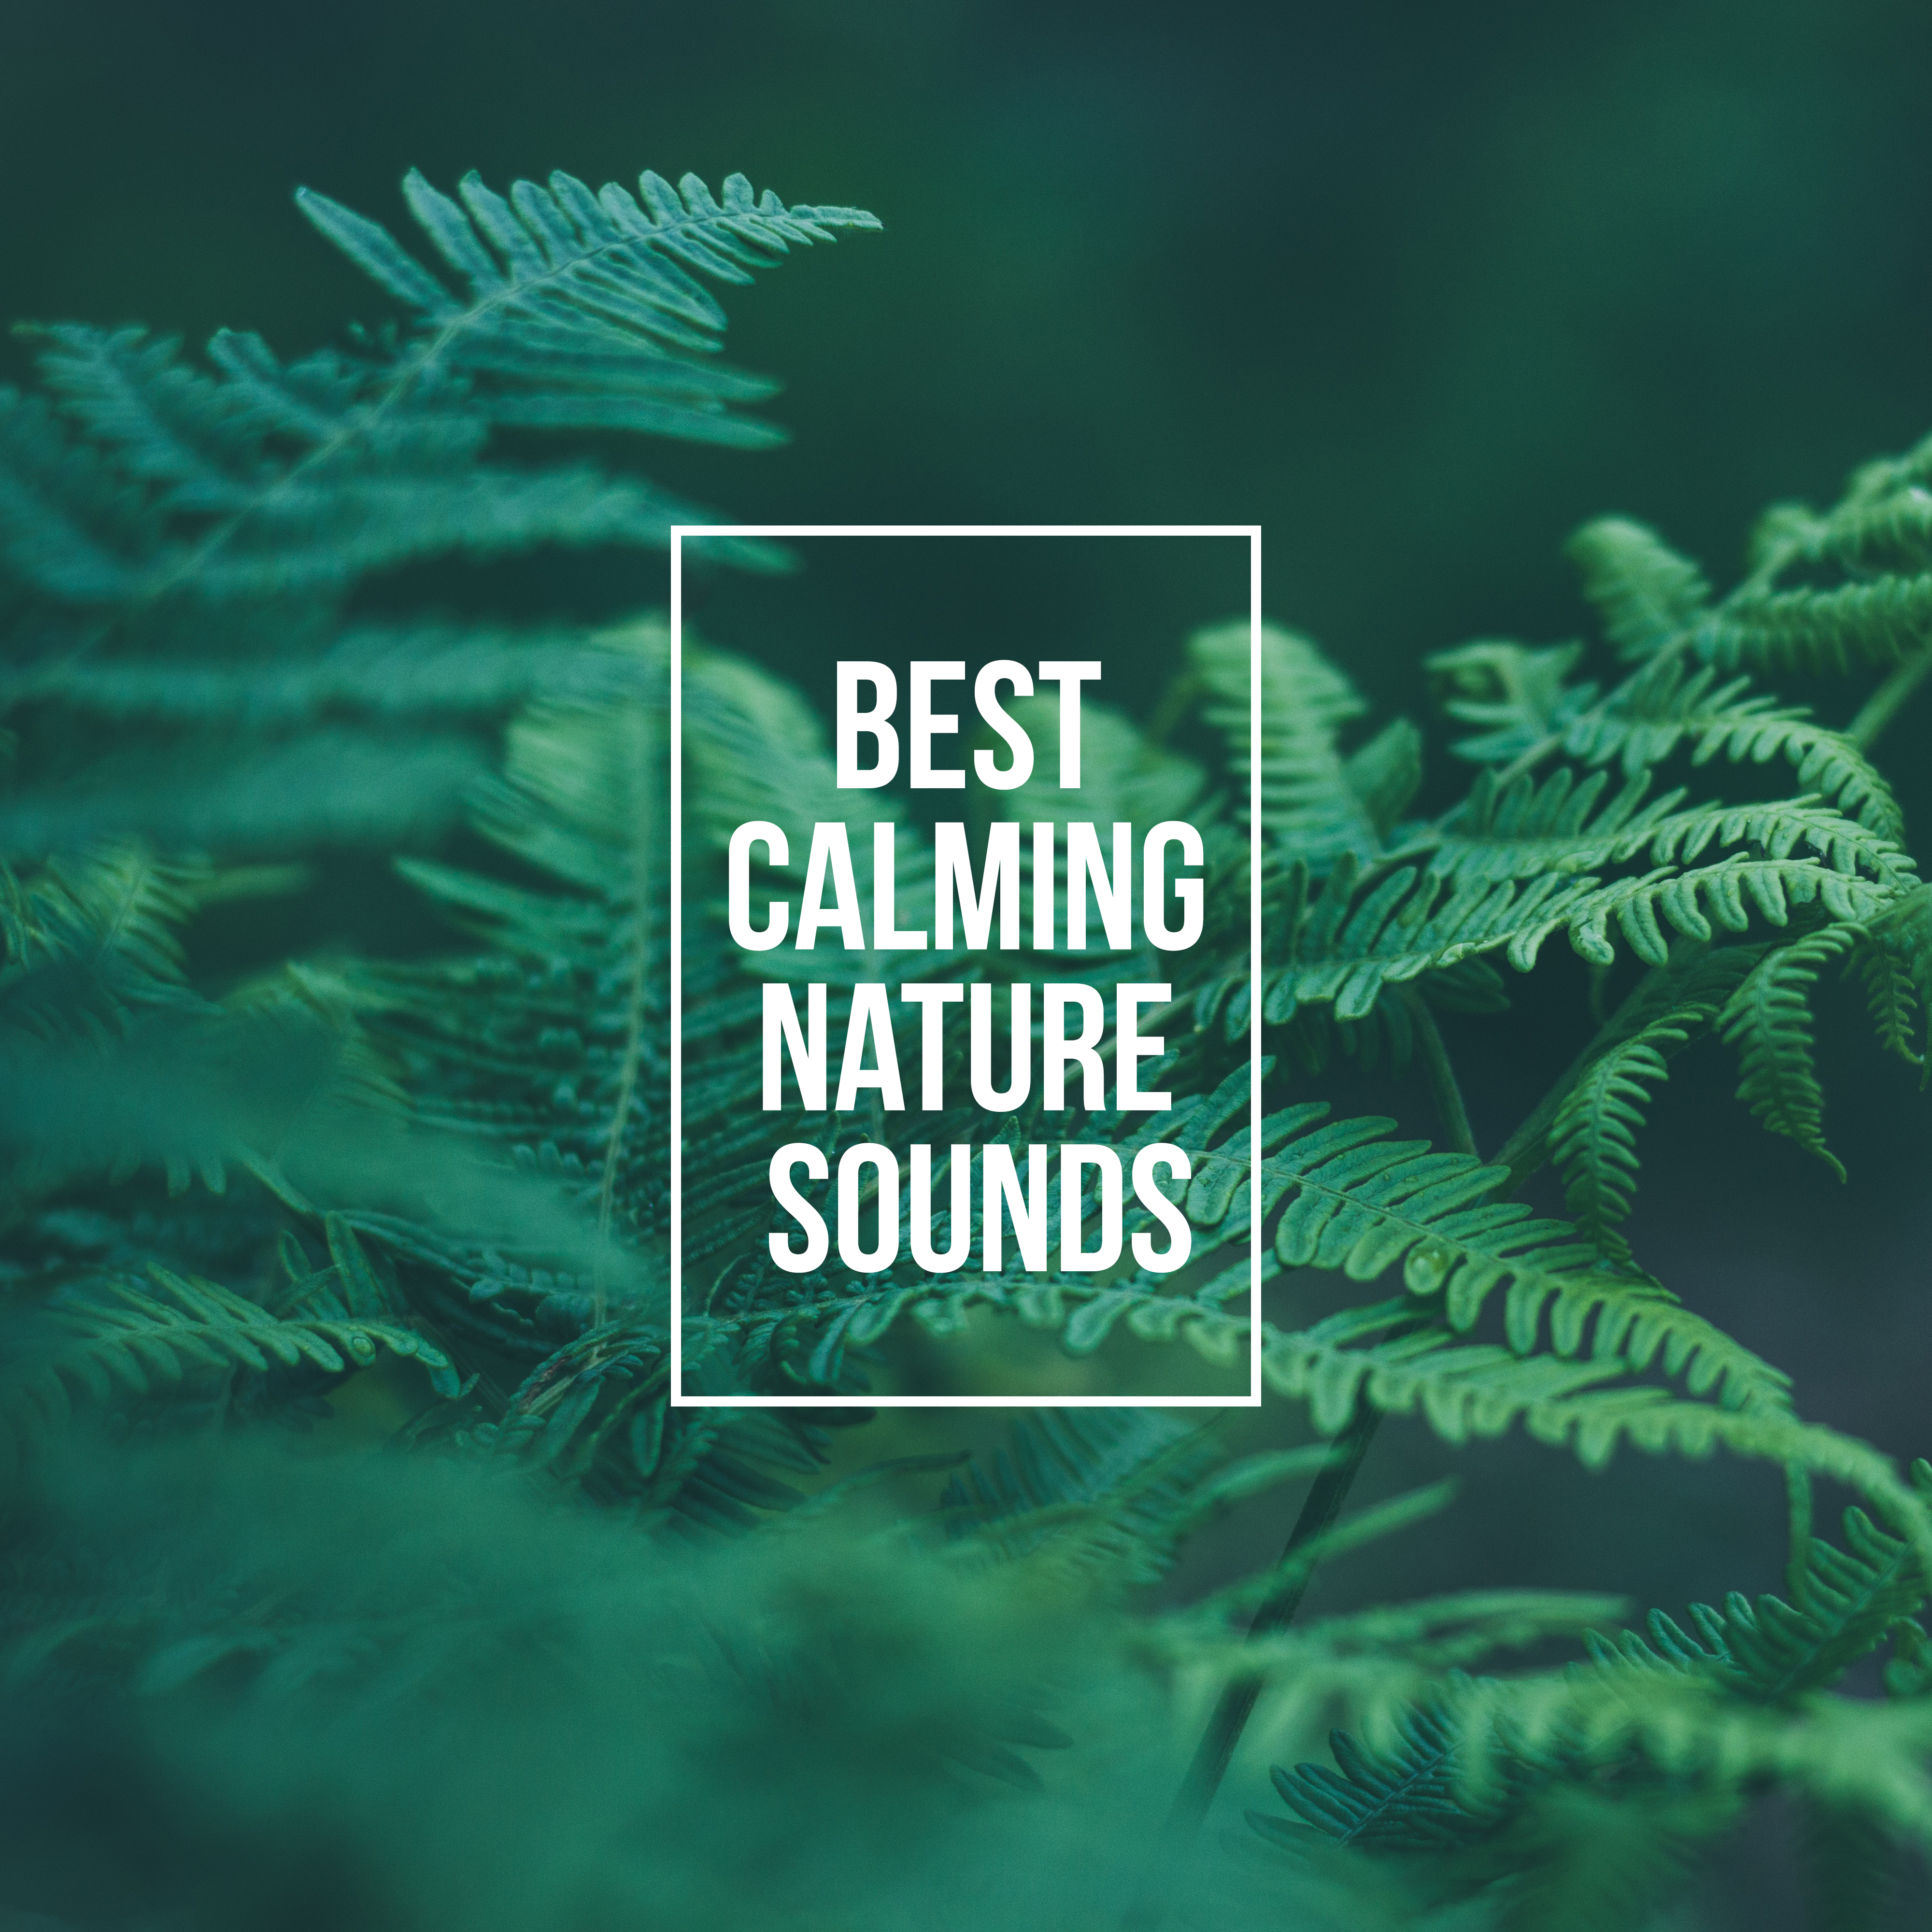 Best Calming Nature Sounds – Relax Your Body & Mind with Nature New Age Music